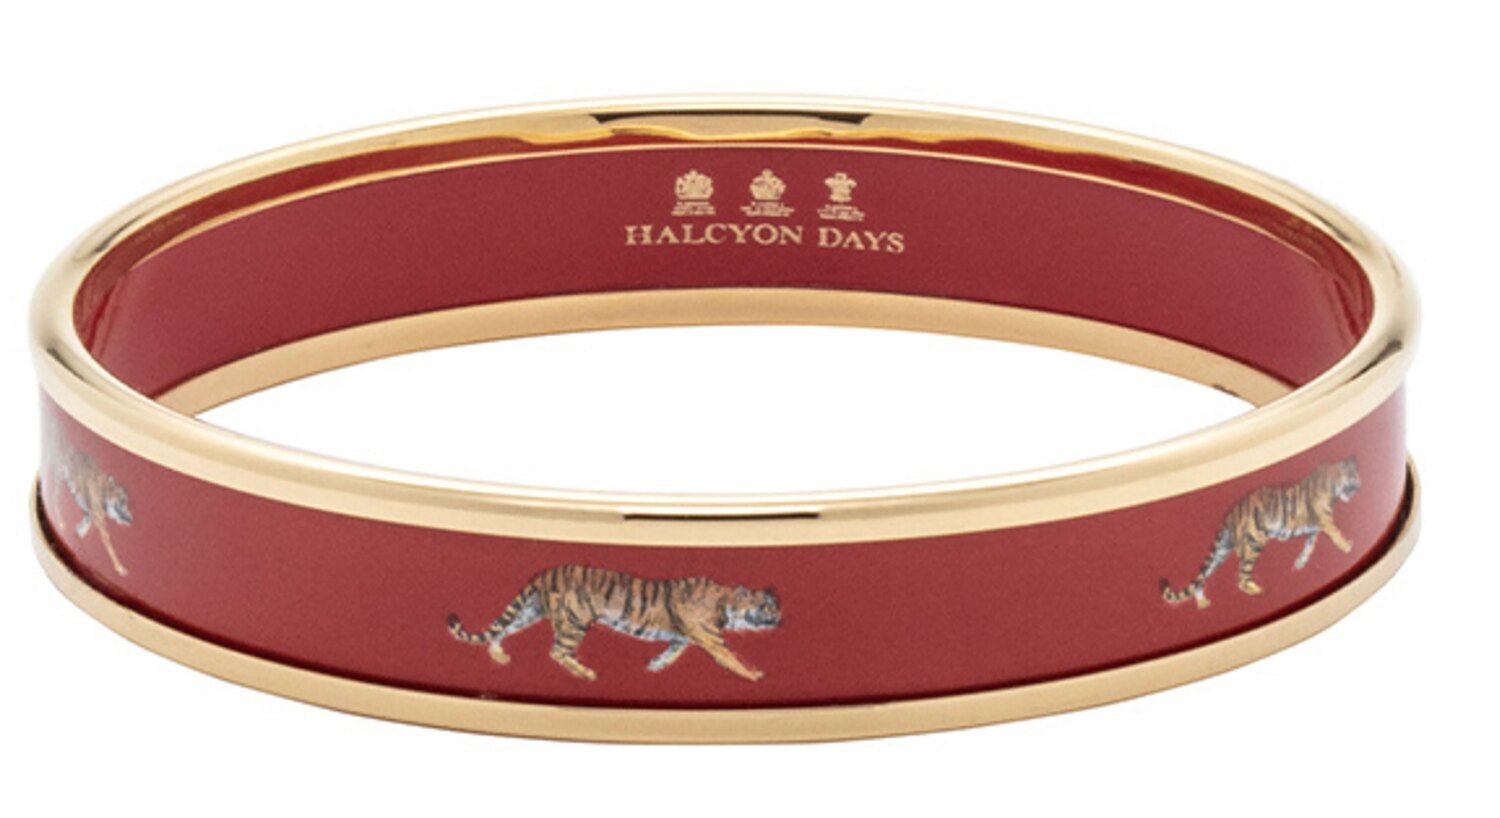 Halcyon Days 1cm Tiger Red Gold Small Bangle Bracelet PBMWT0610GS